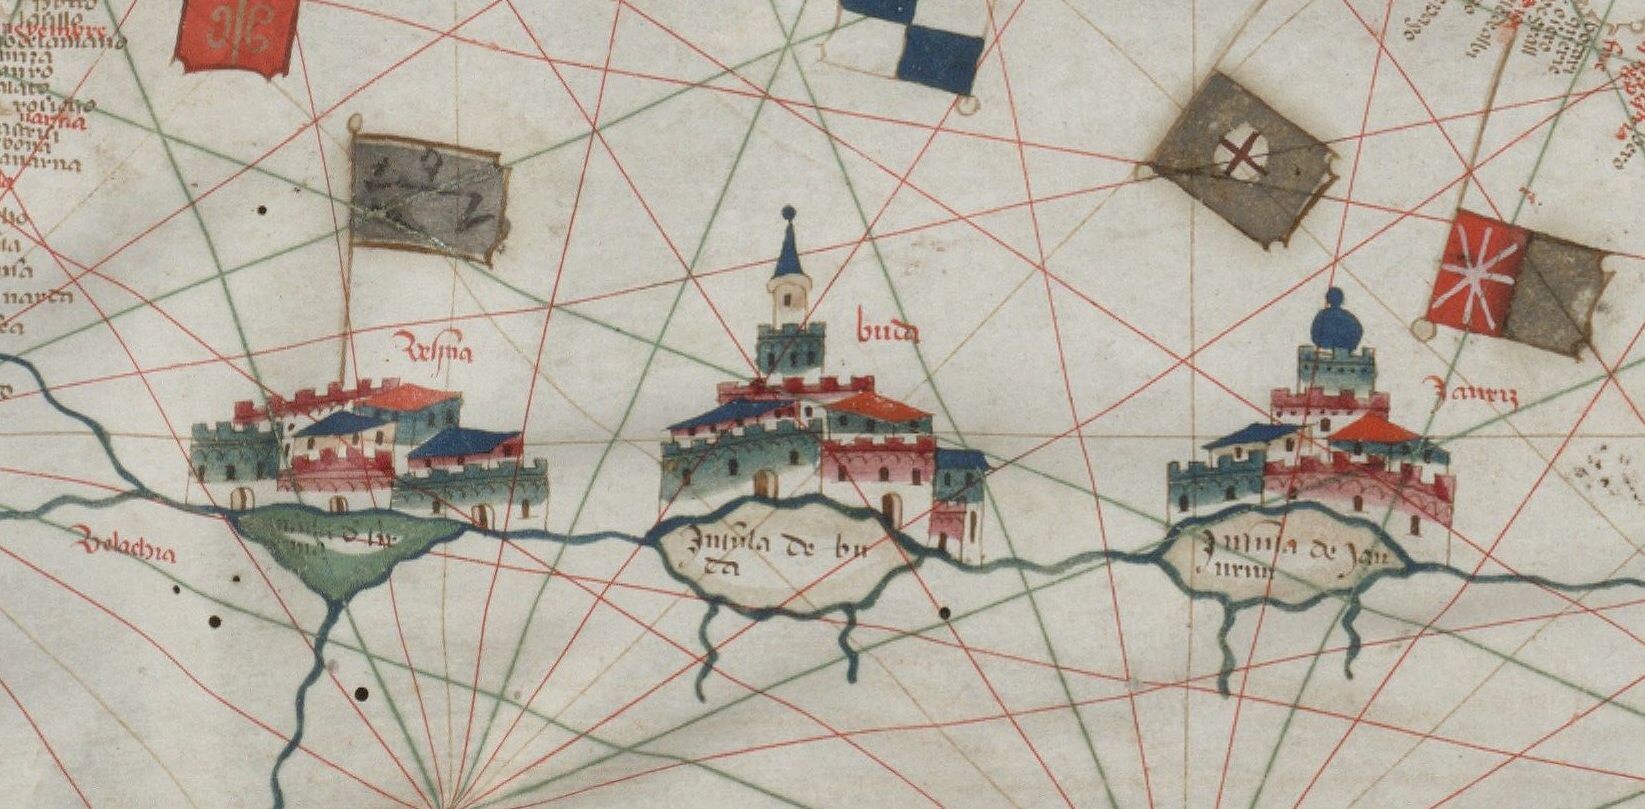 Detail from 15th century portolan chart that focuses on three hand illustrated cities in red, green, and blue.